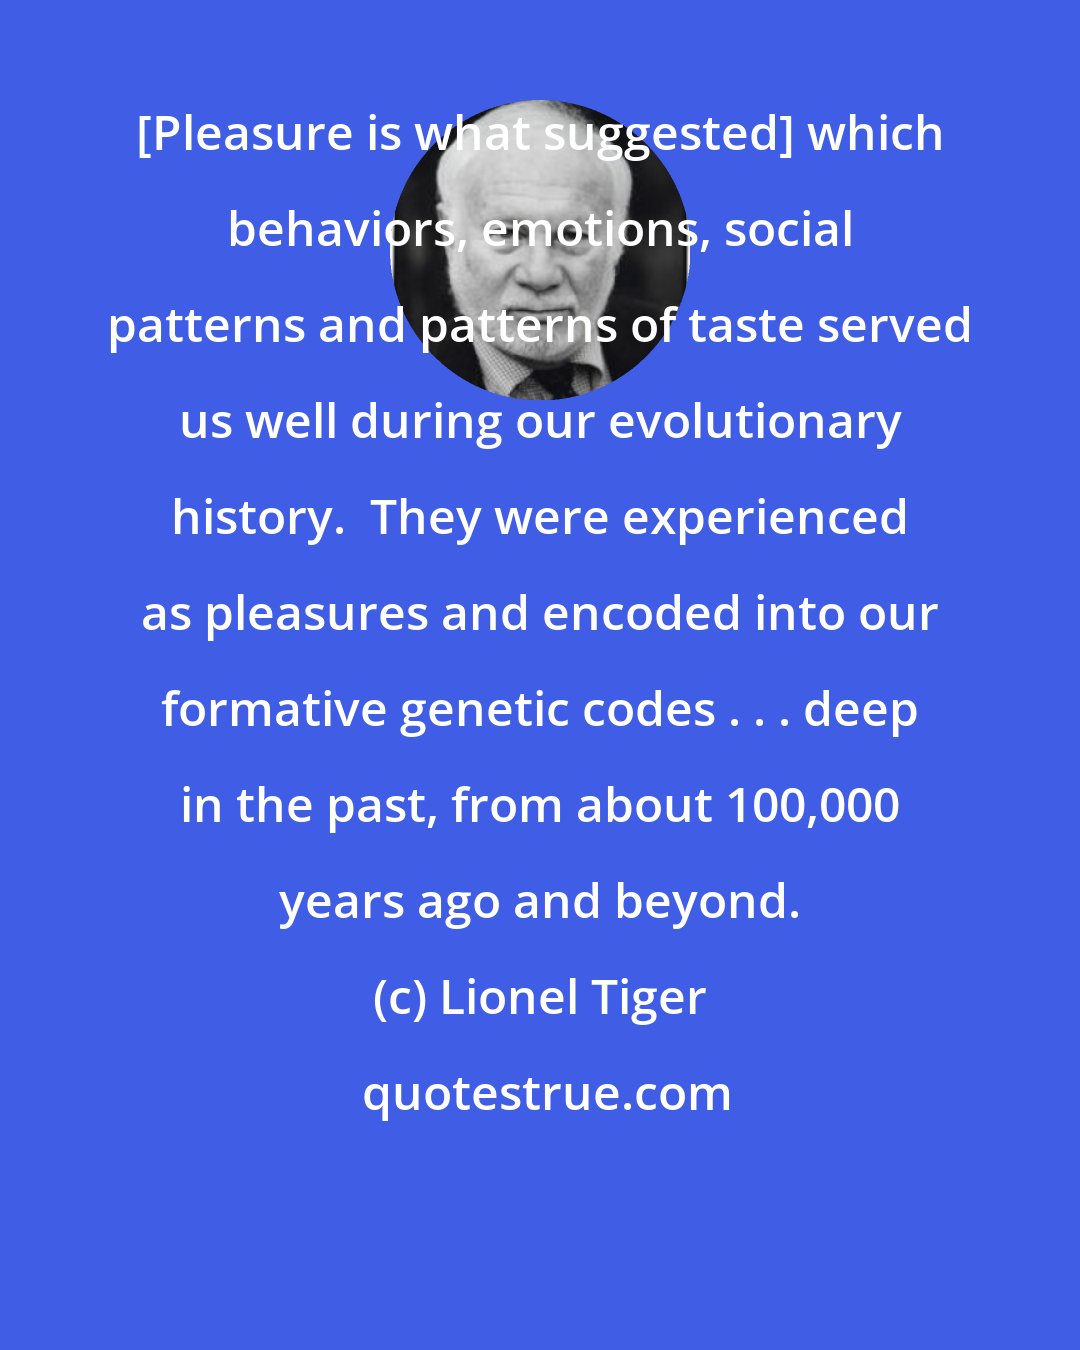 Lionel Tiger: [Pleasure is what suggested] which behaviors, emotions, social patterns and patterns of taste served us well during our evolutionary history.  They were experienced as pleasures and encoded into our formative genetic codes . . . deep in the past, from about 100,000 years ago and beyond.